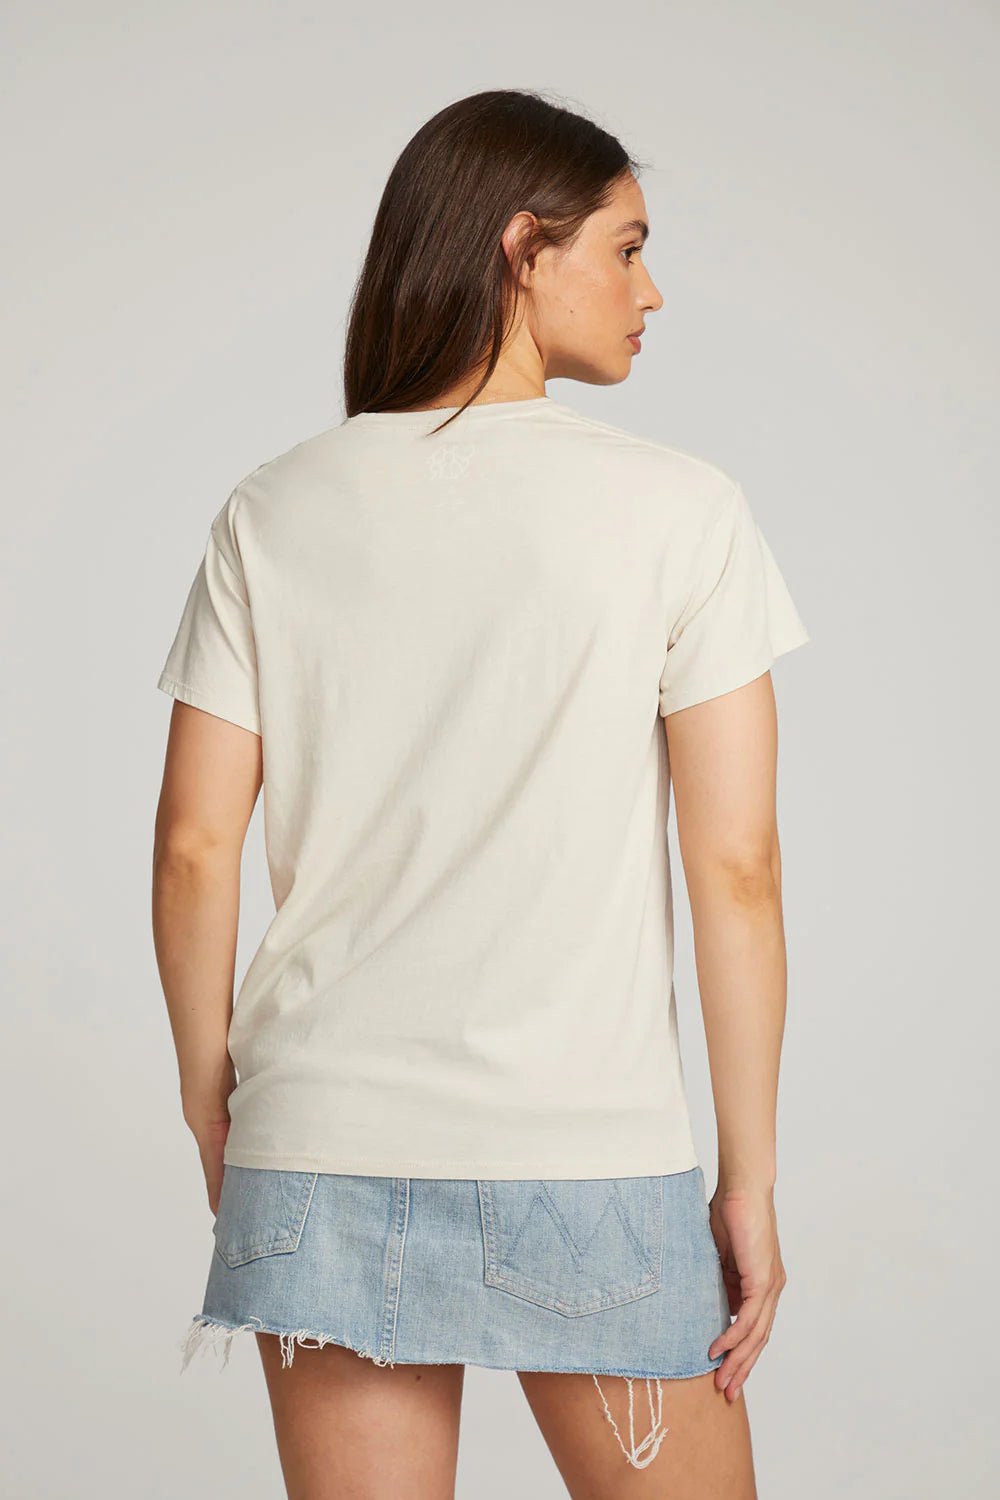 Chaser Tequila Tee in Oatmeal - Estilo Boutique